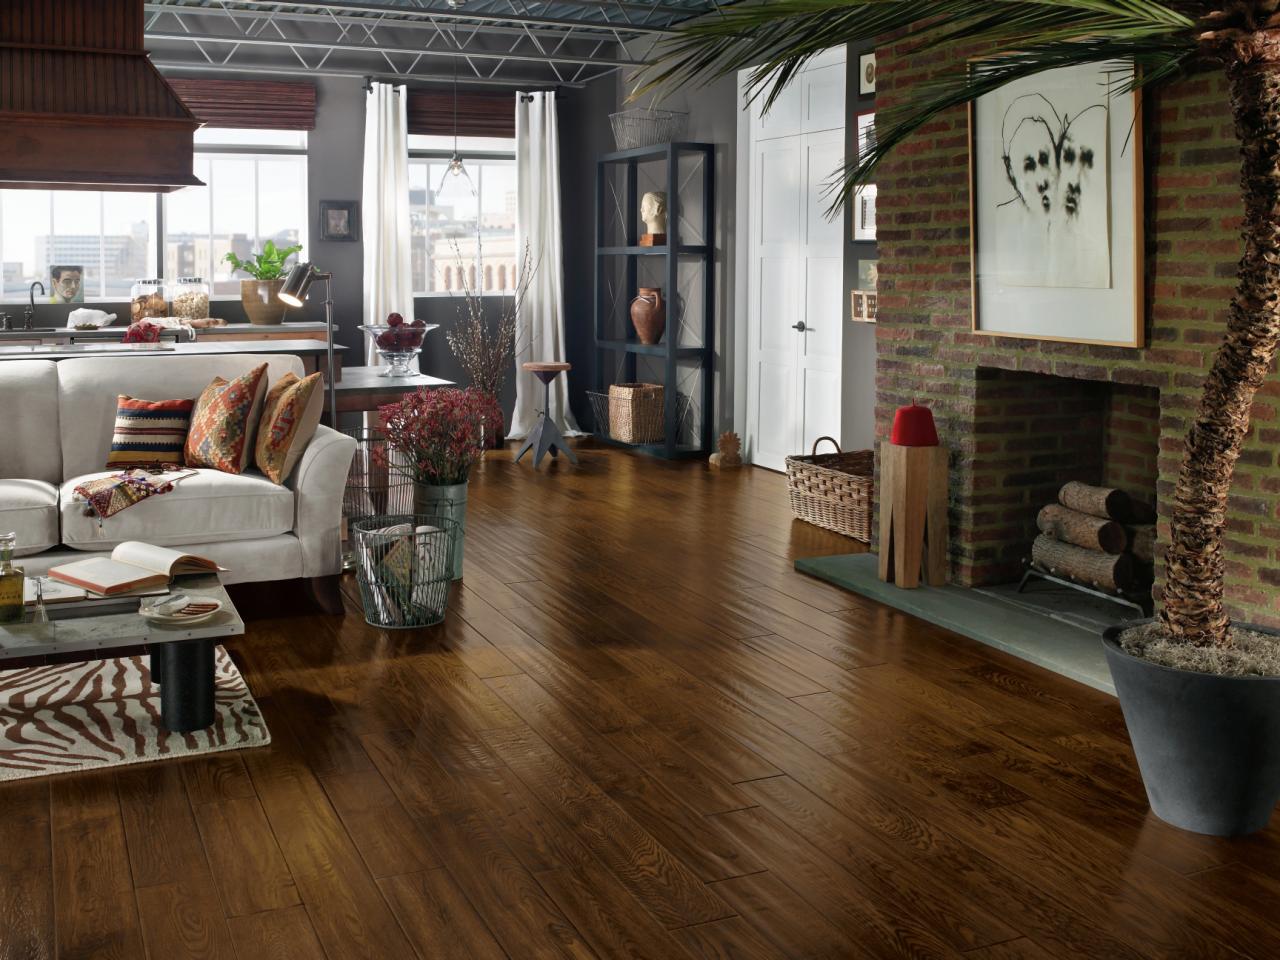 Top Living Room Flooring Options, Best Flooring For High Traffic Areas In House